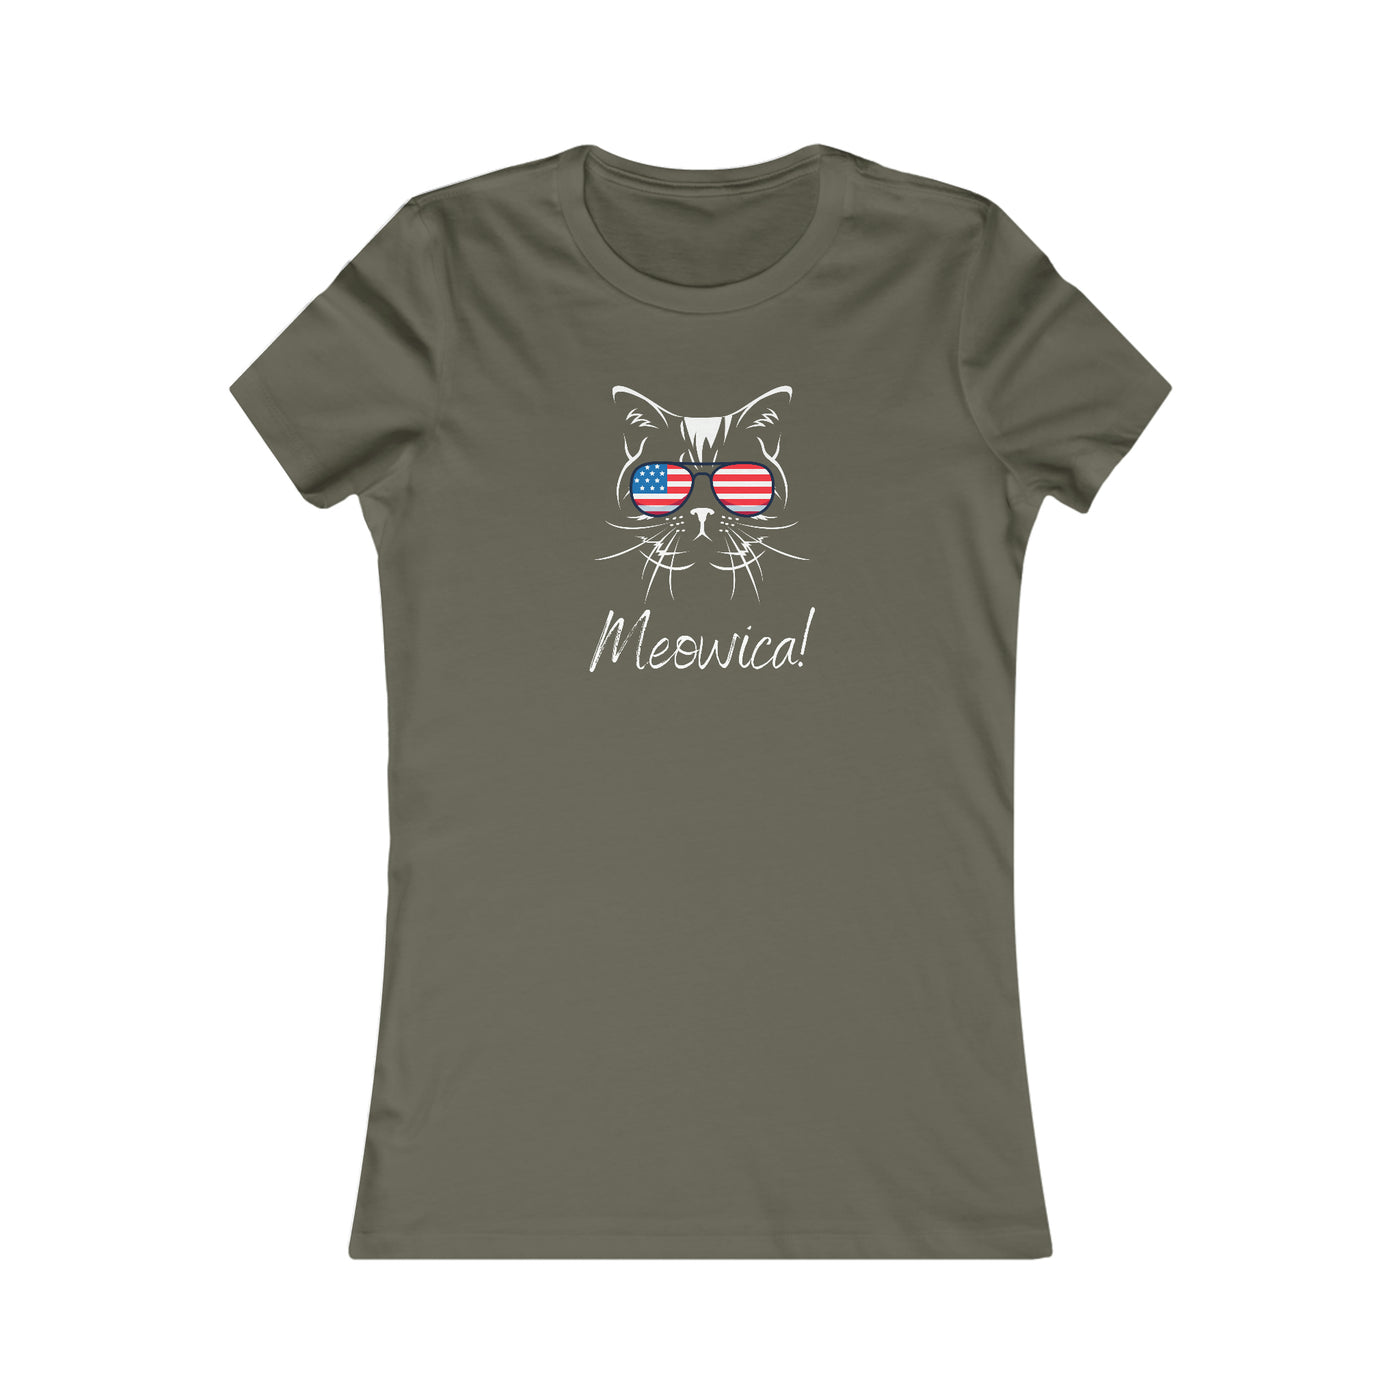 fourth of july Meowica! Women's Favorite T shirt army green